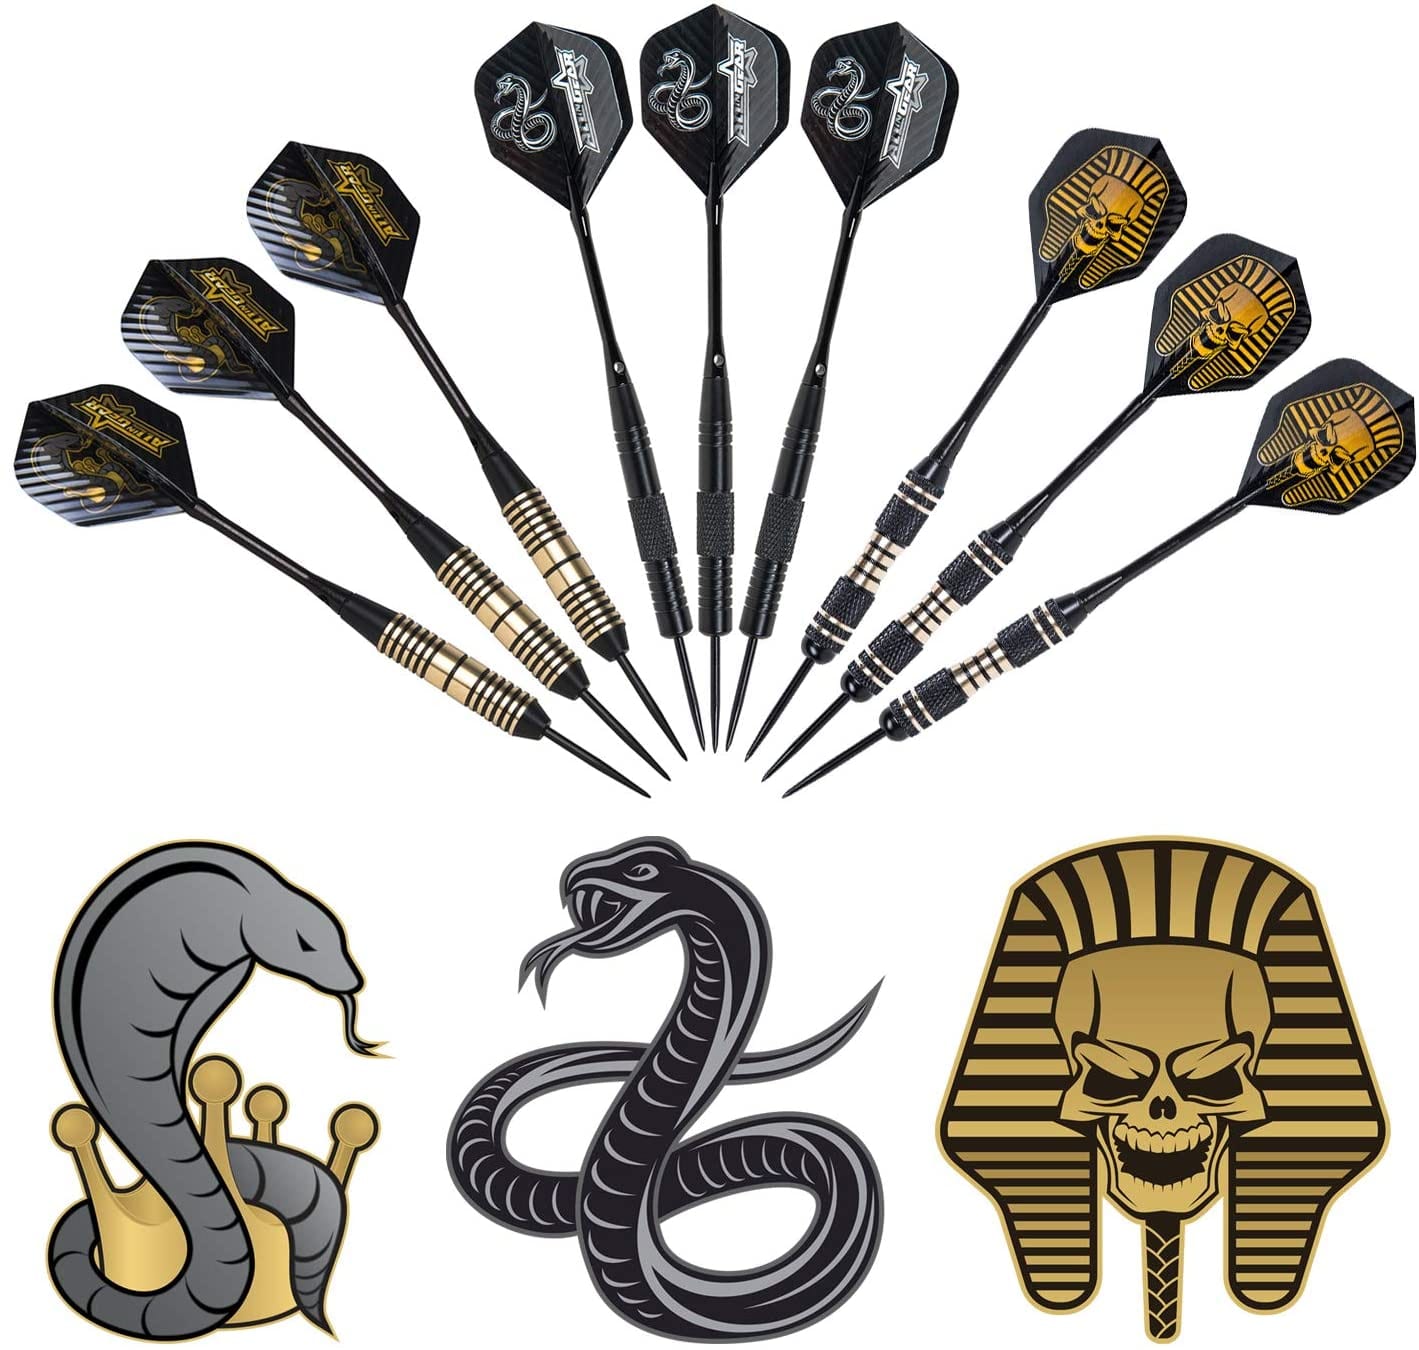 All In Gear Darts Dart Sets Choose from 21-22-23-24 Grams Sets with Brass Barrels